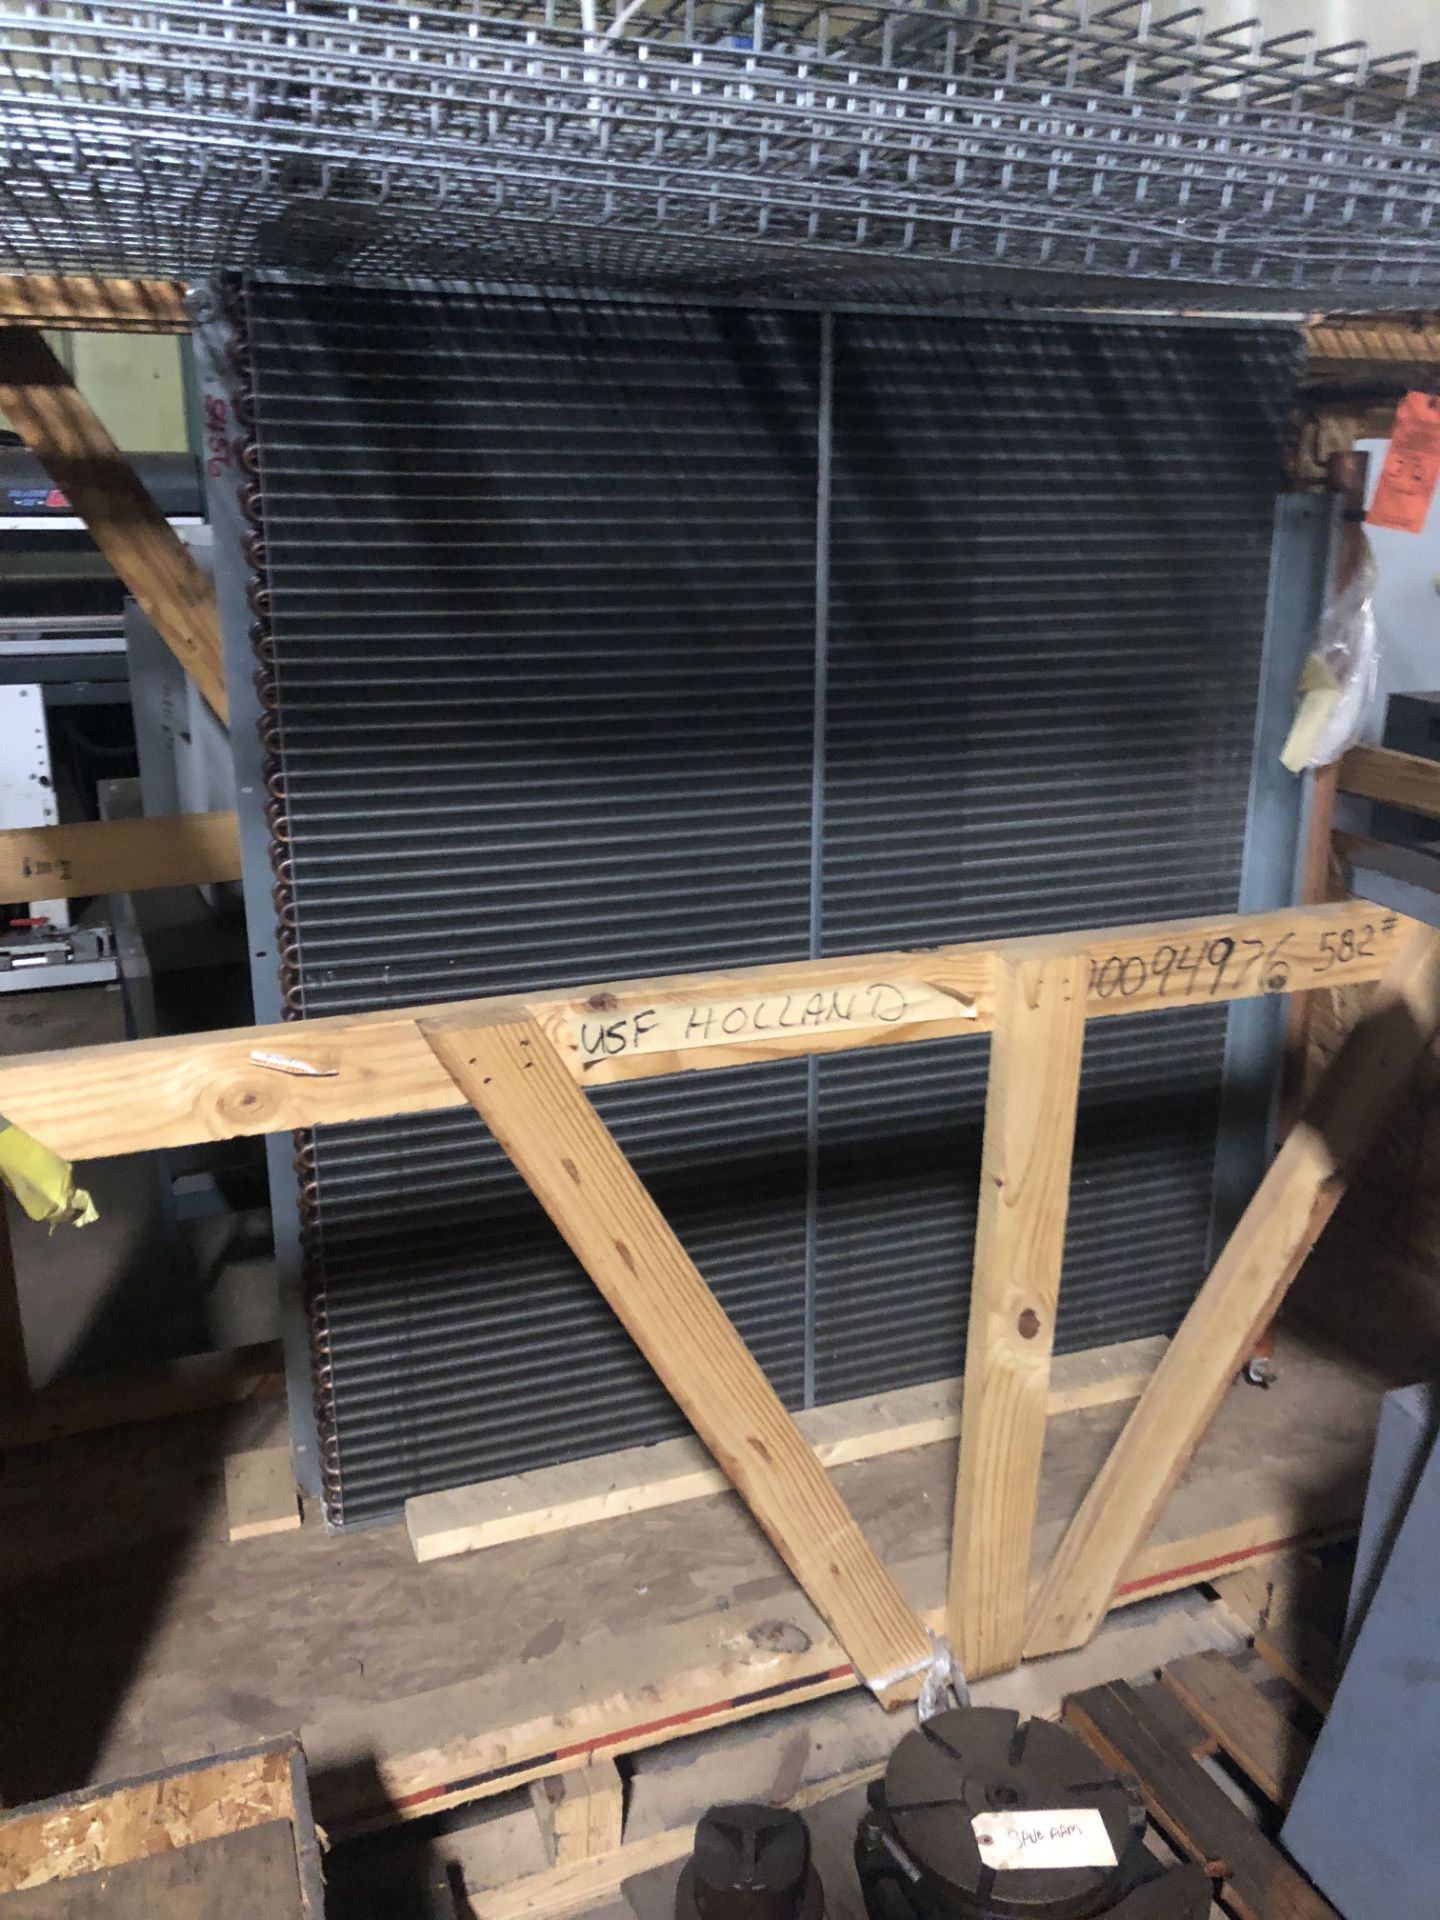 DIMPLEX THERMAL SOLUTION CONDENSING COIL MODEL-116366302 - Image 3 of 3